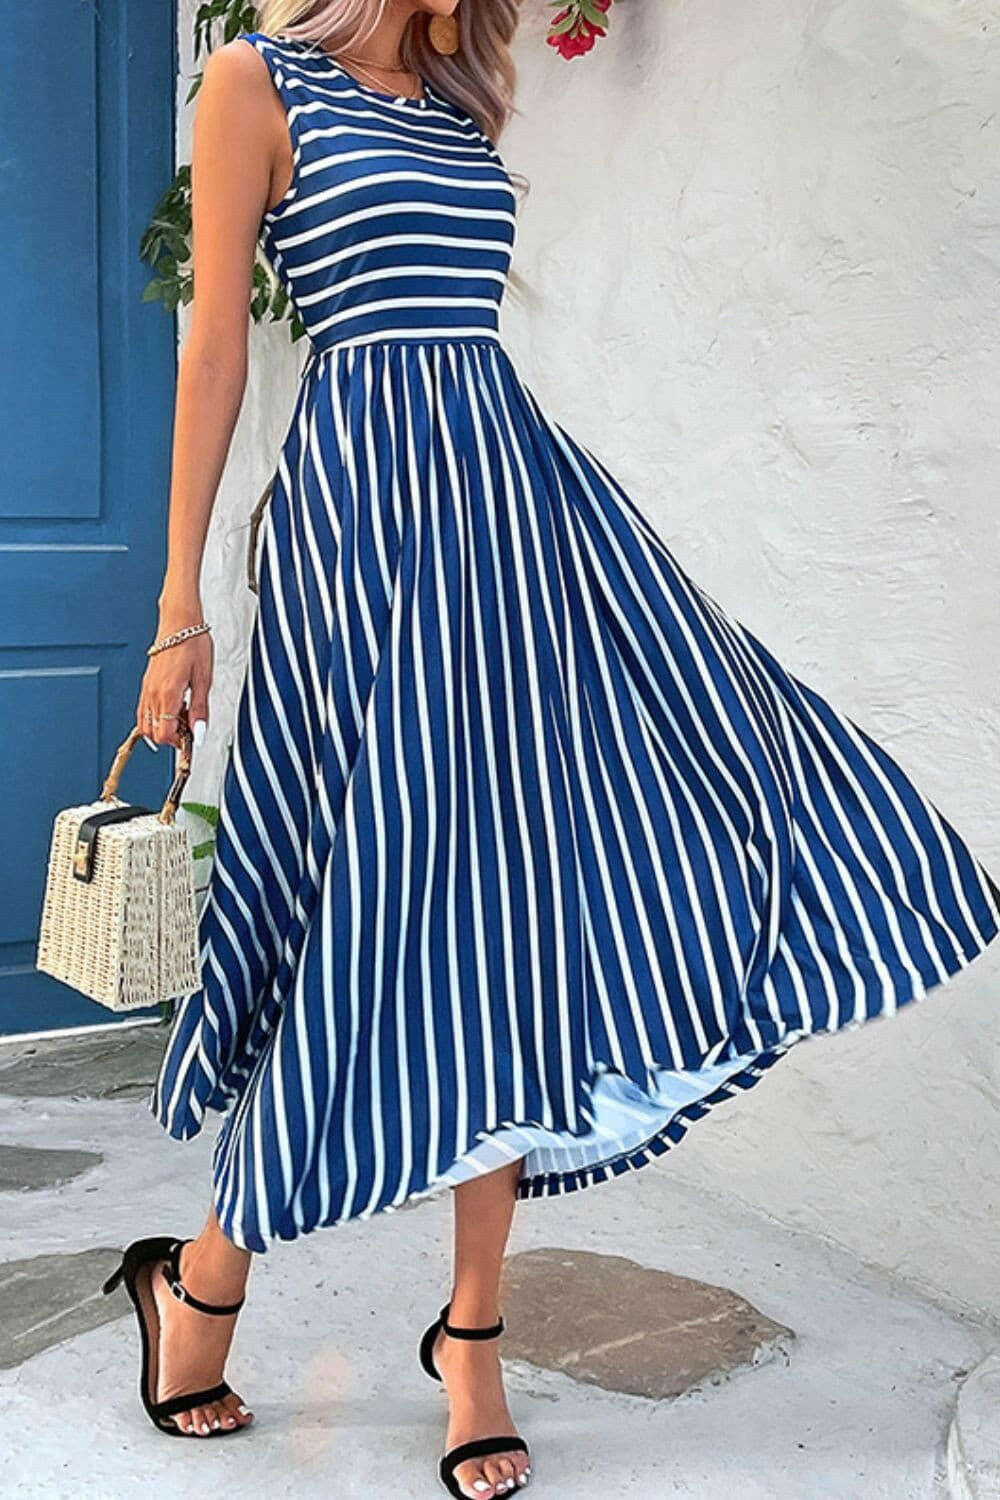 Striped Round Neck Sleeveless Dress with Pockets - By Baano